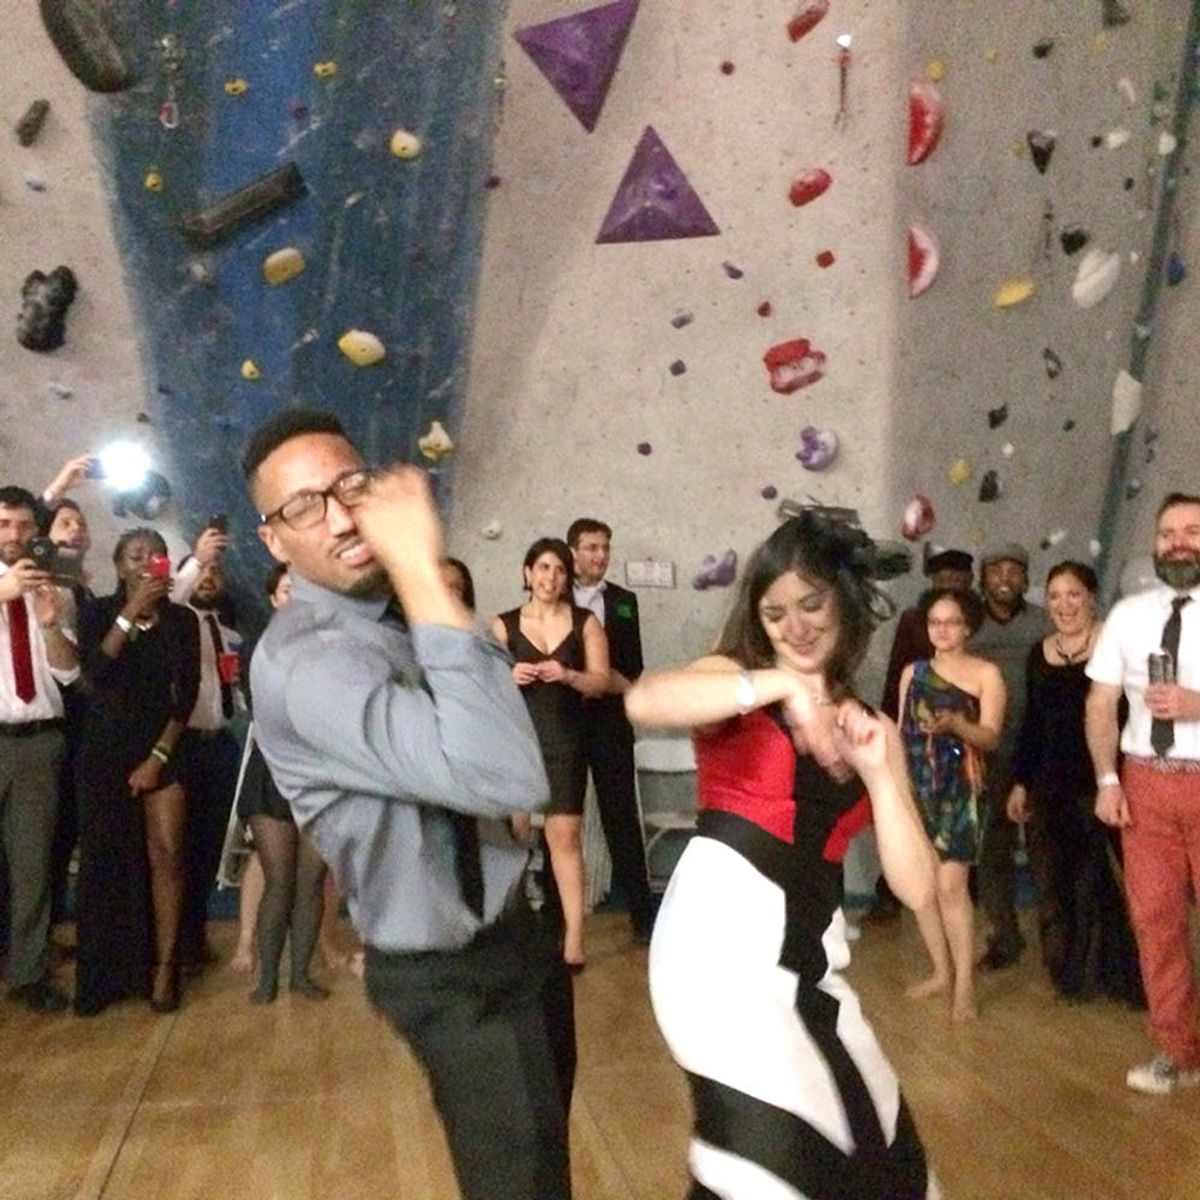 Why This Creative Couple Got Married in a Rock Climbing Gym